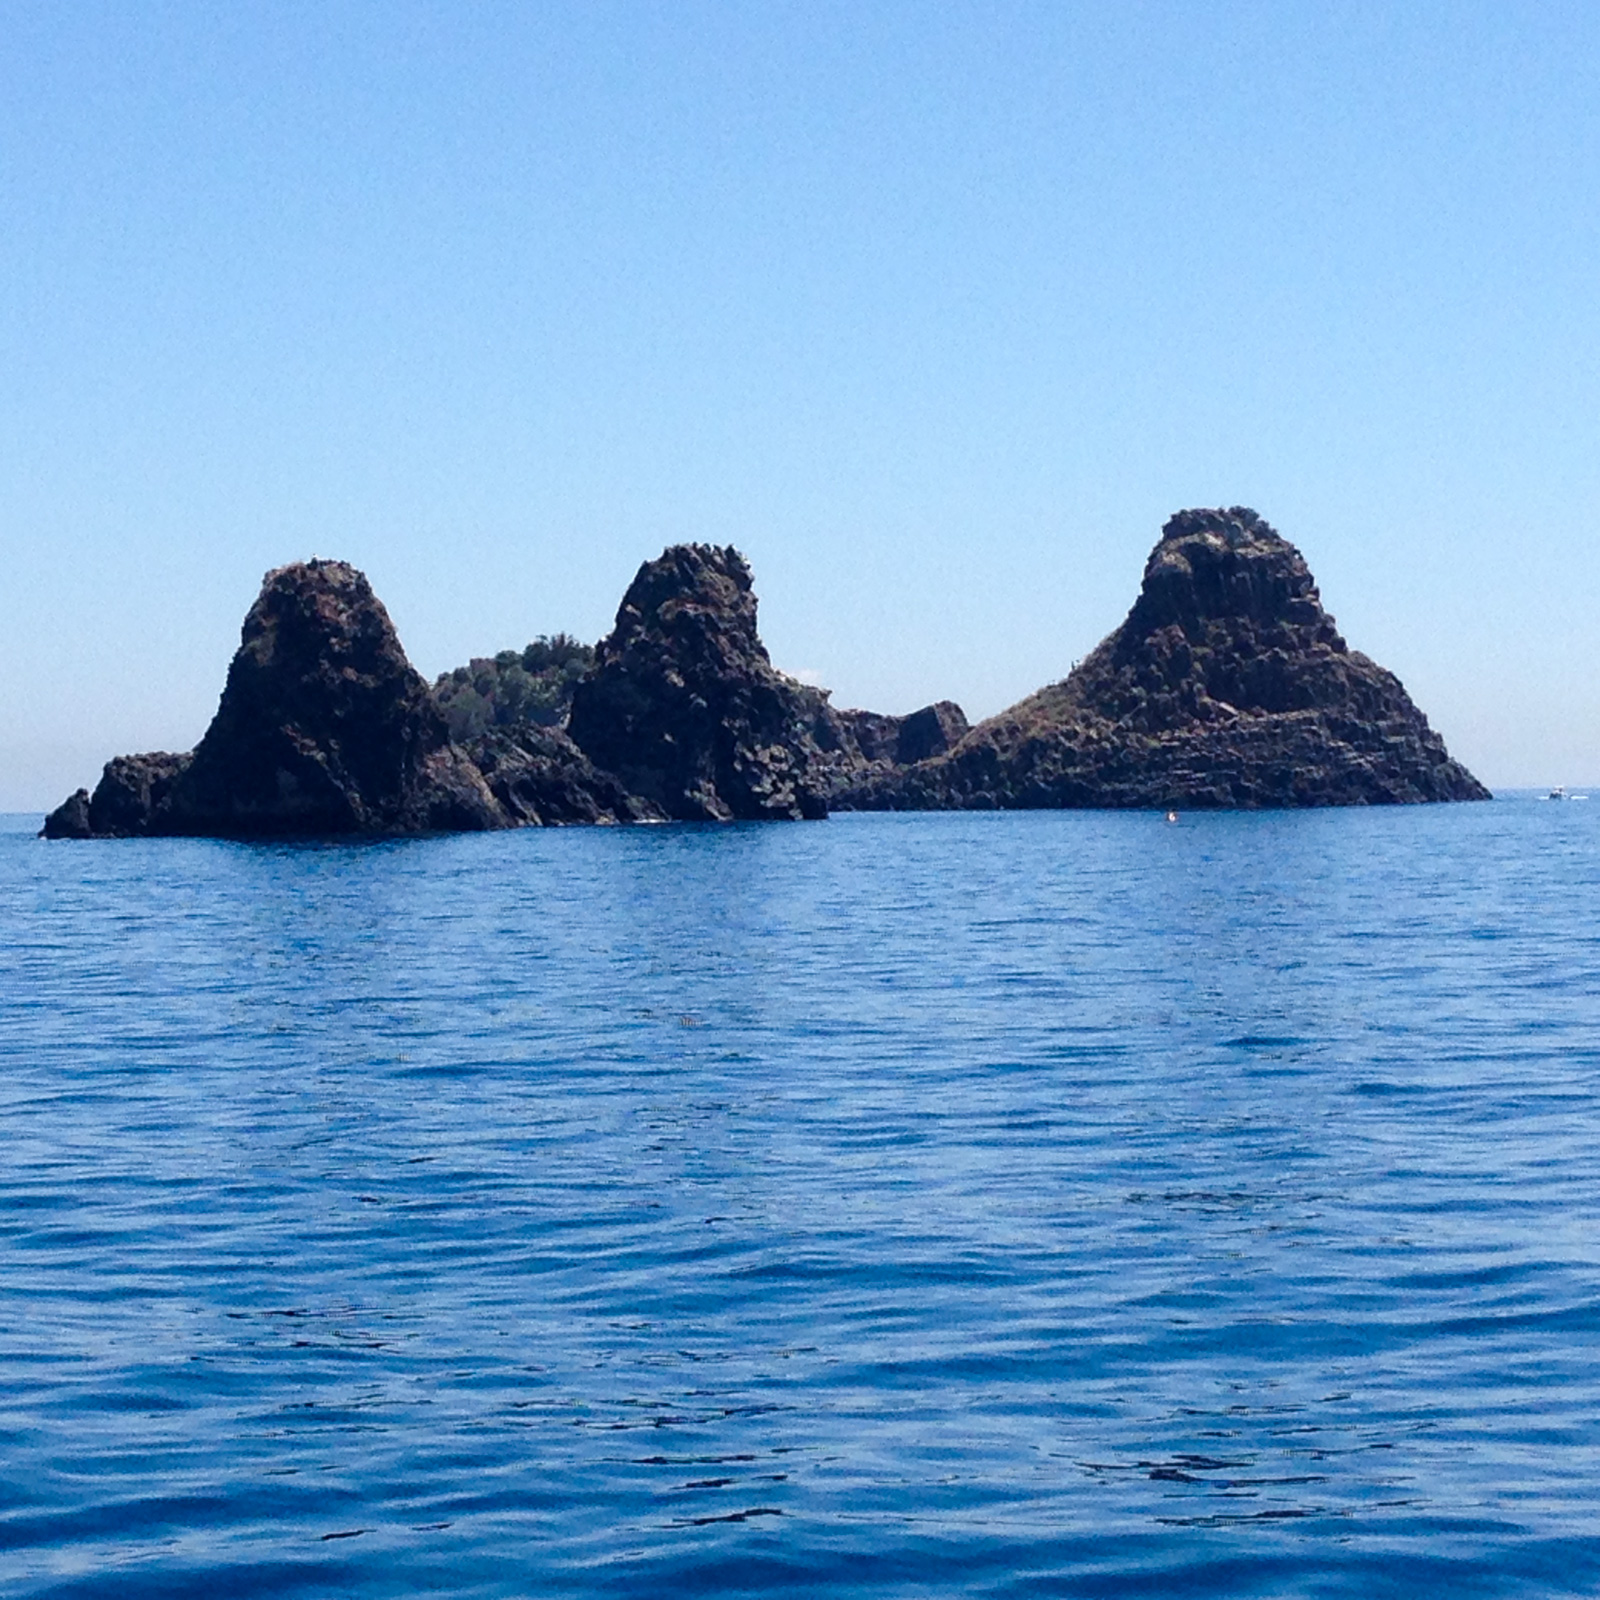 Catania day trip: sailing to Aci Trezza in search of the cyclops